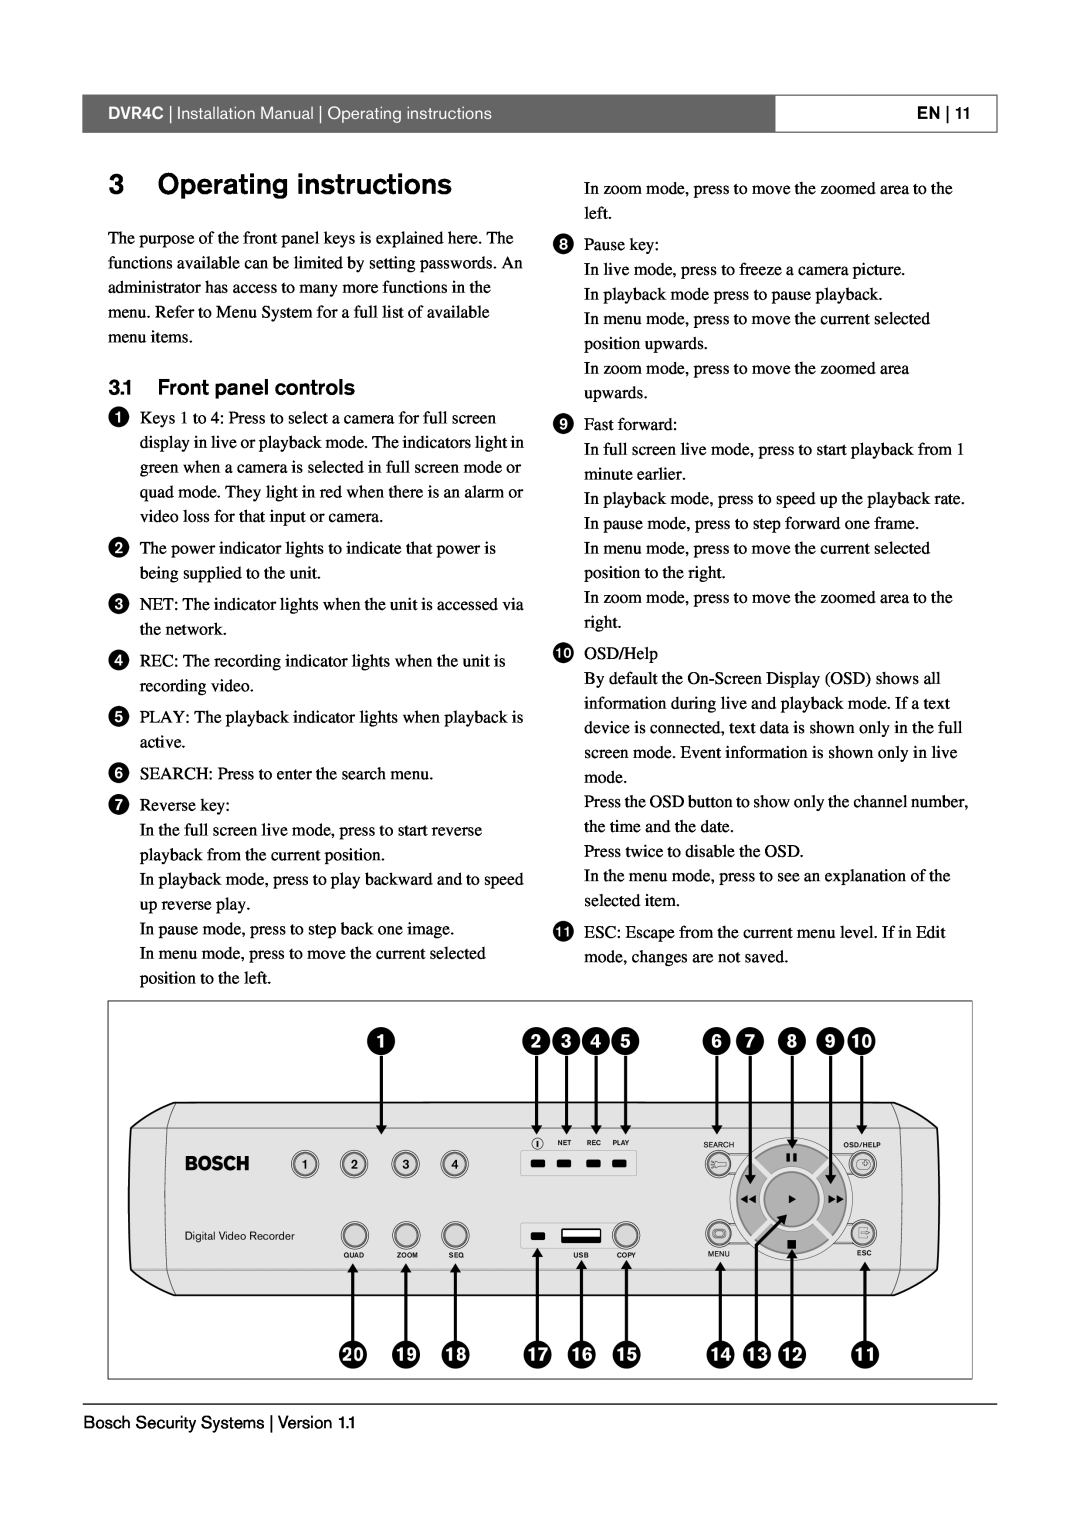 Bosch Appliances DVR4C installation manual 3Operating instructions, 3.1Front panel controls 